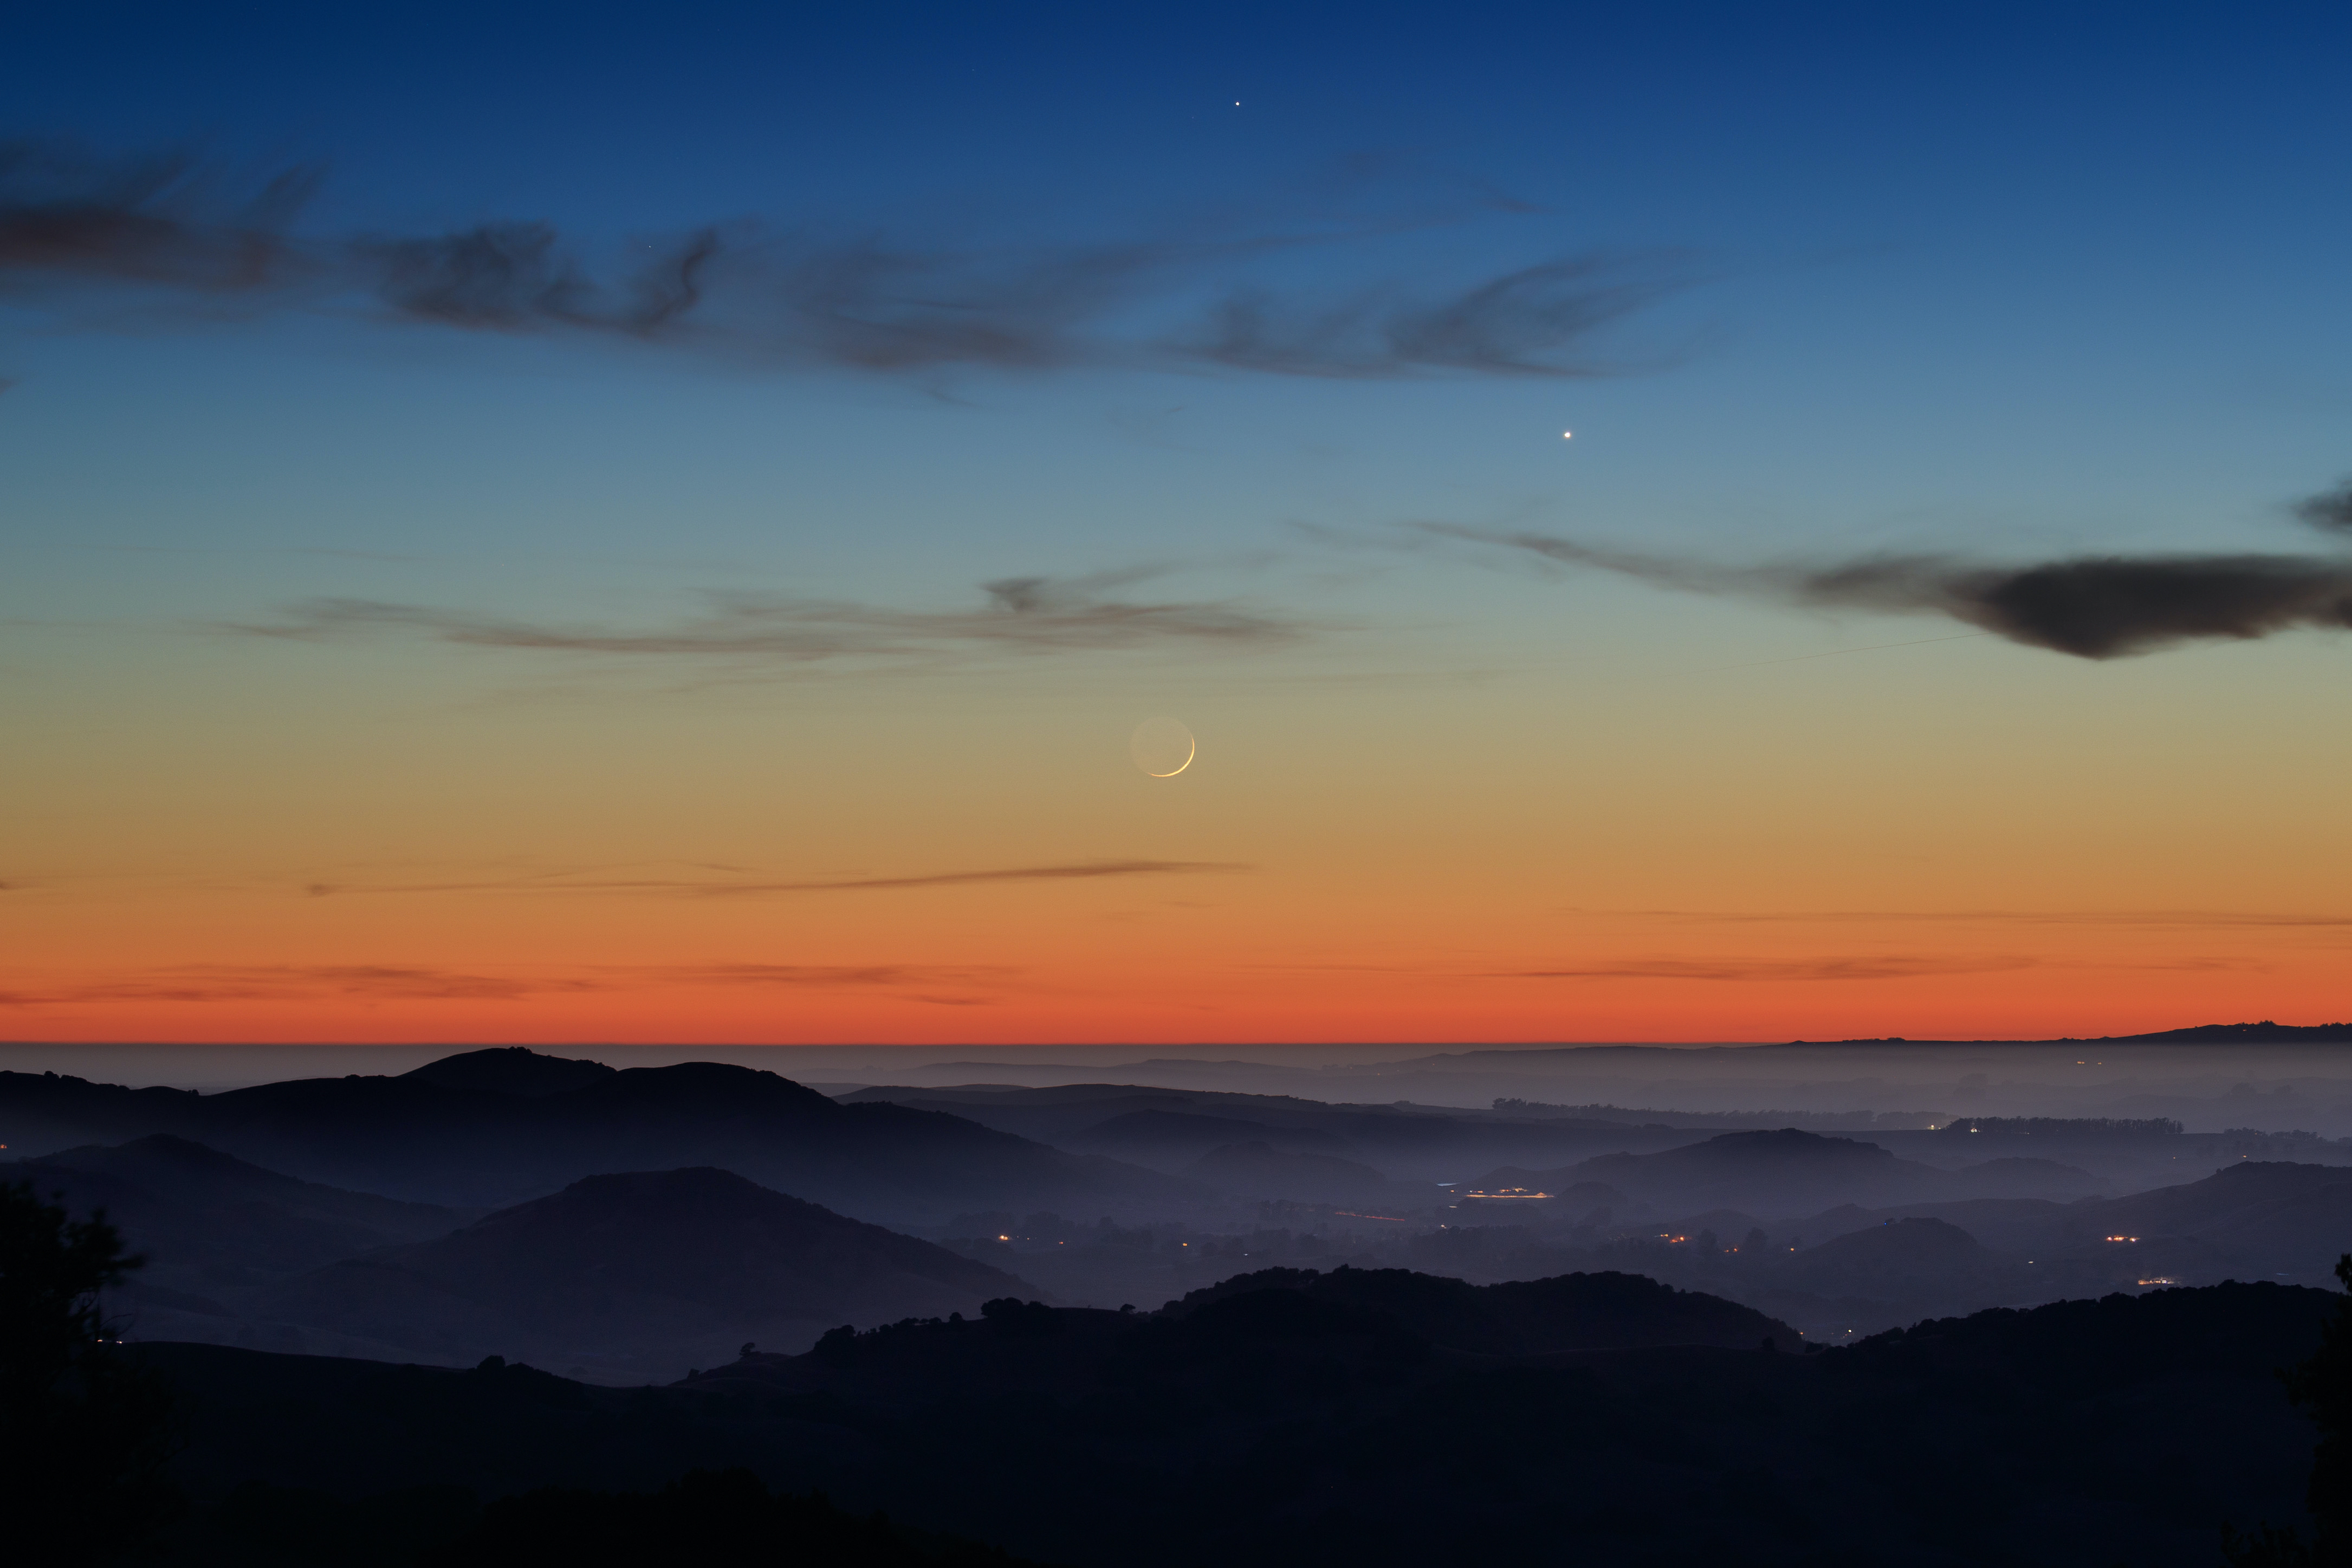 Photography Landscape Nature Sunset Moon Stars Mountains Aerial View Evening Sky Sunset Glow Clouds 4000x2667